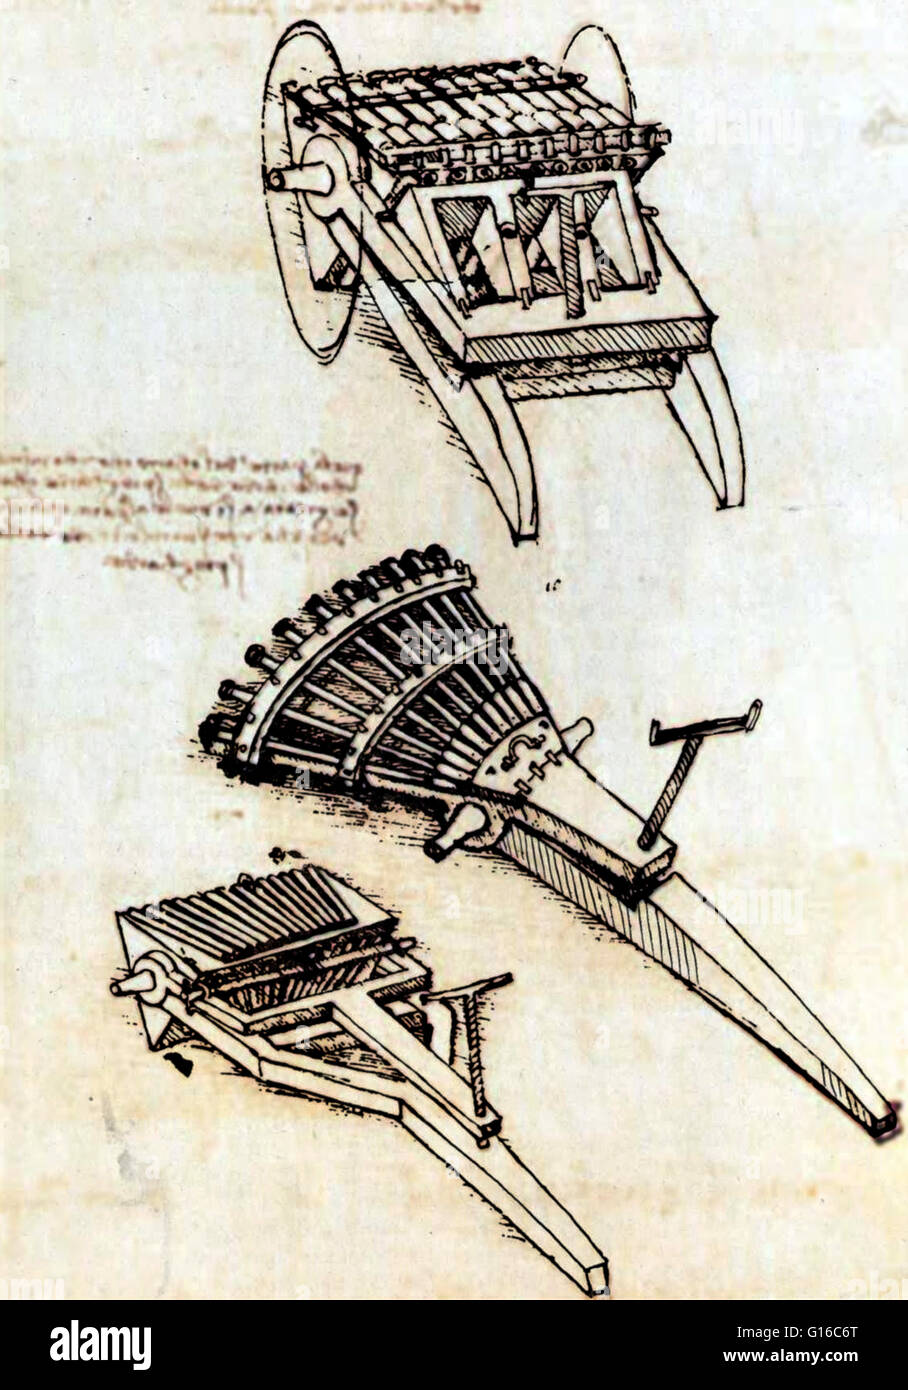 Guns with array of horizontal barrels and gun with three racks of barrels, circa 1481. Firearms in renaissance times were inaccurate and suffered from a slow rate of fire. Leonardo, in his design for a multi-barreled cannon of 1481, sought to overcome the Stock Photo